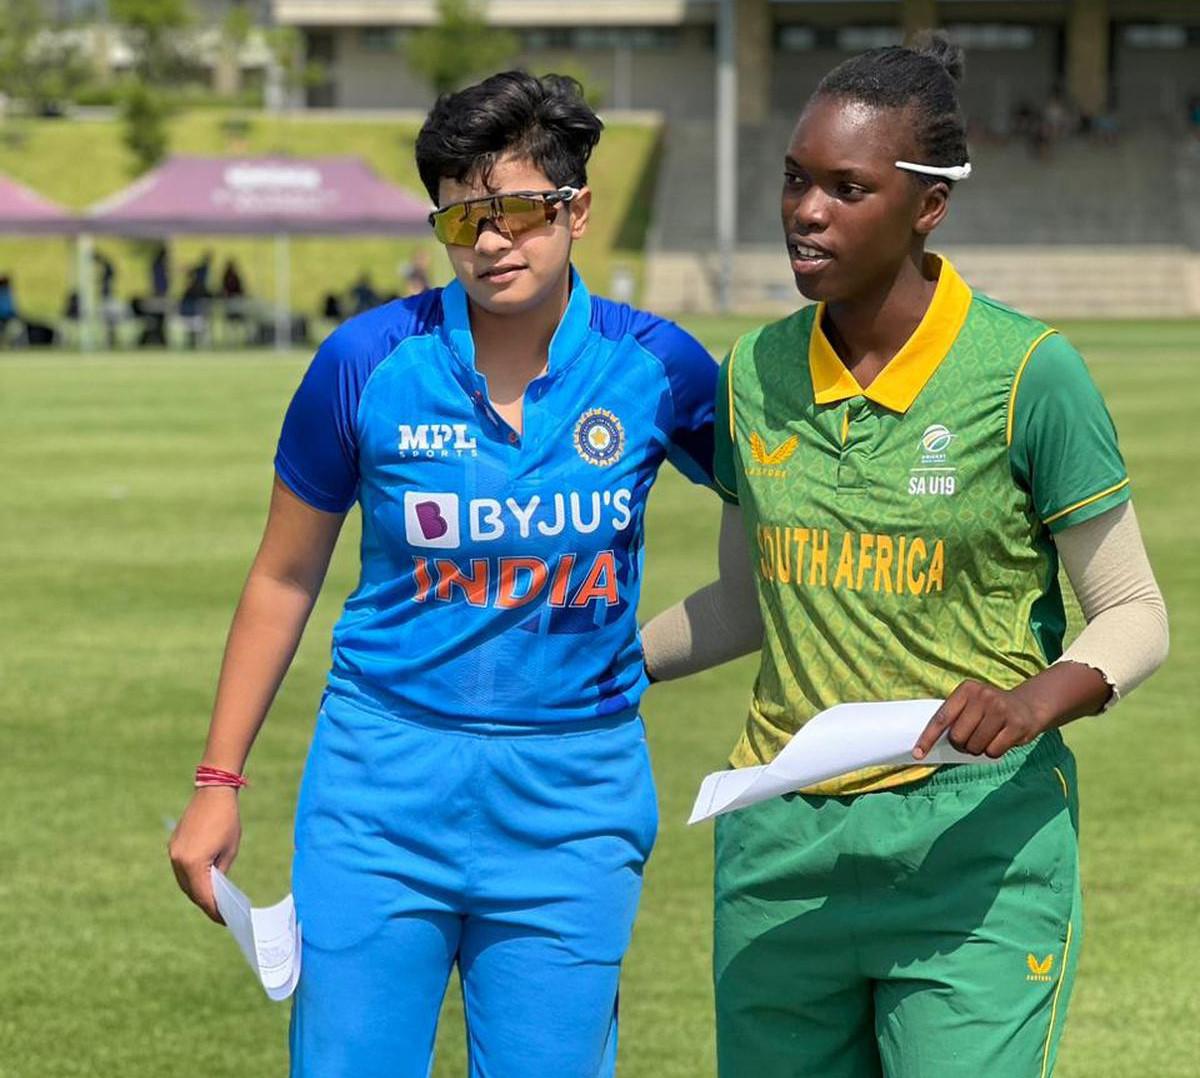 India Women U19 tour of South Africa 2022-23 Schedule, fixtures and match time table, Squads. South Africa Women U19 vs India Women U19 2022-23 Team Captain and Players list, live score, ESPNcricinfo, Cricbuzz, Wikipedia, International Cricket Series Matches Time Table.